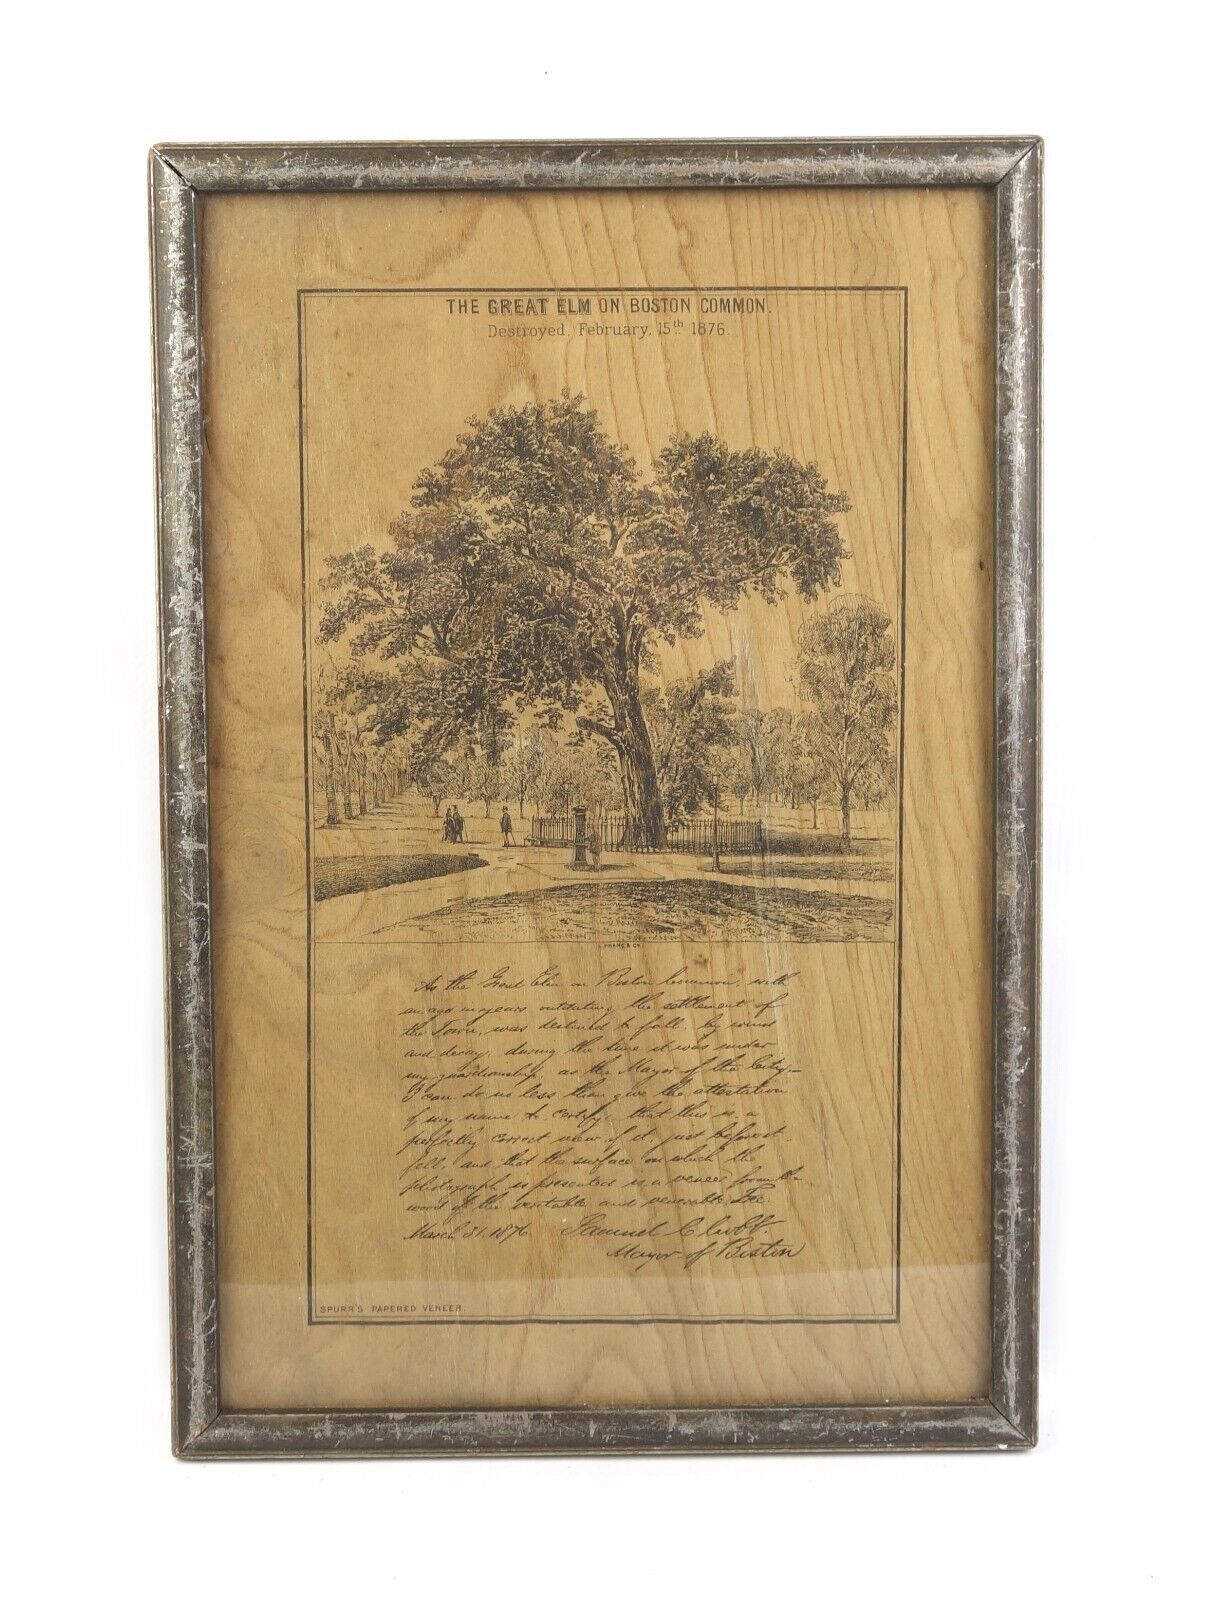 Antique 19th C Great Elm on Boston Common 1876 Lithograph Spurrs Papered Veneer